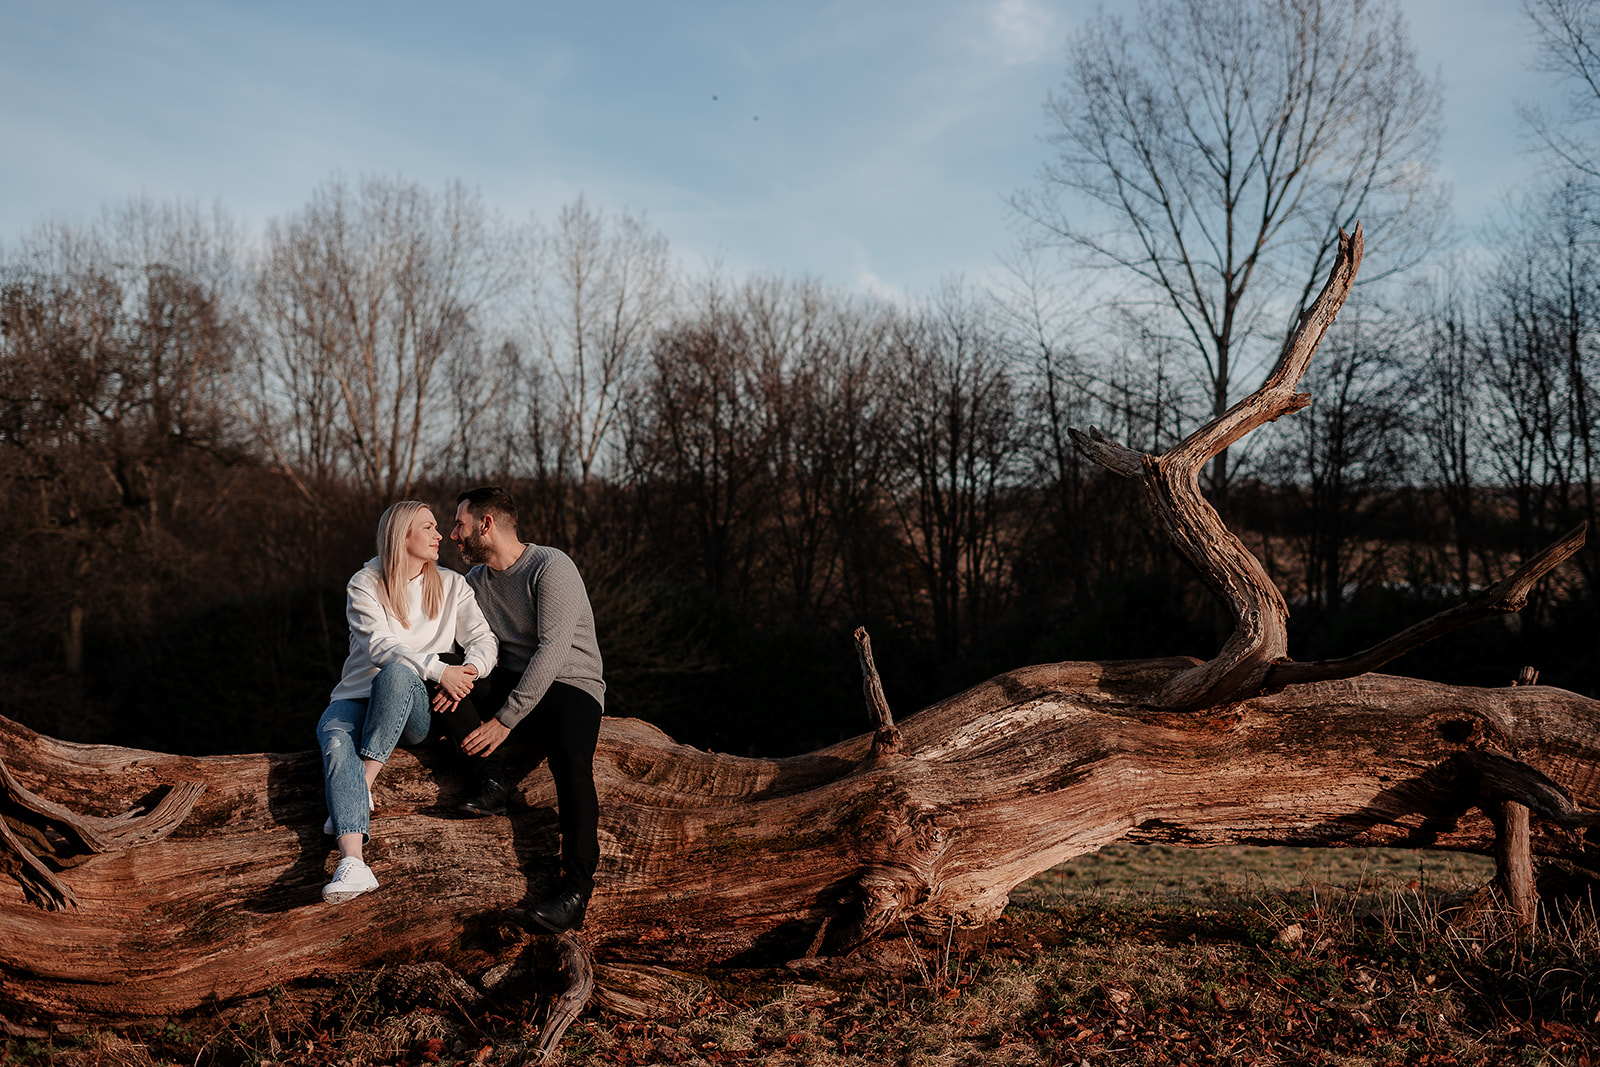 An engaged couple sat on a fallen tree and rest their heads together, bathed in golden sunlight